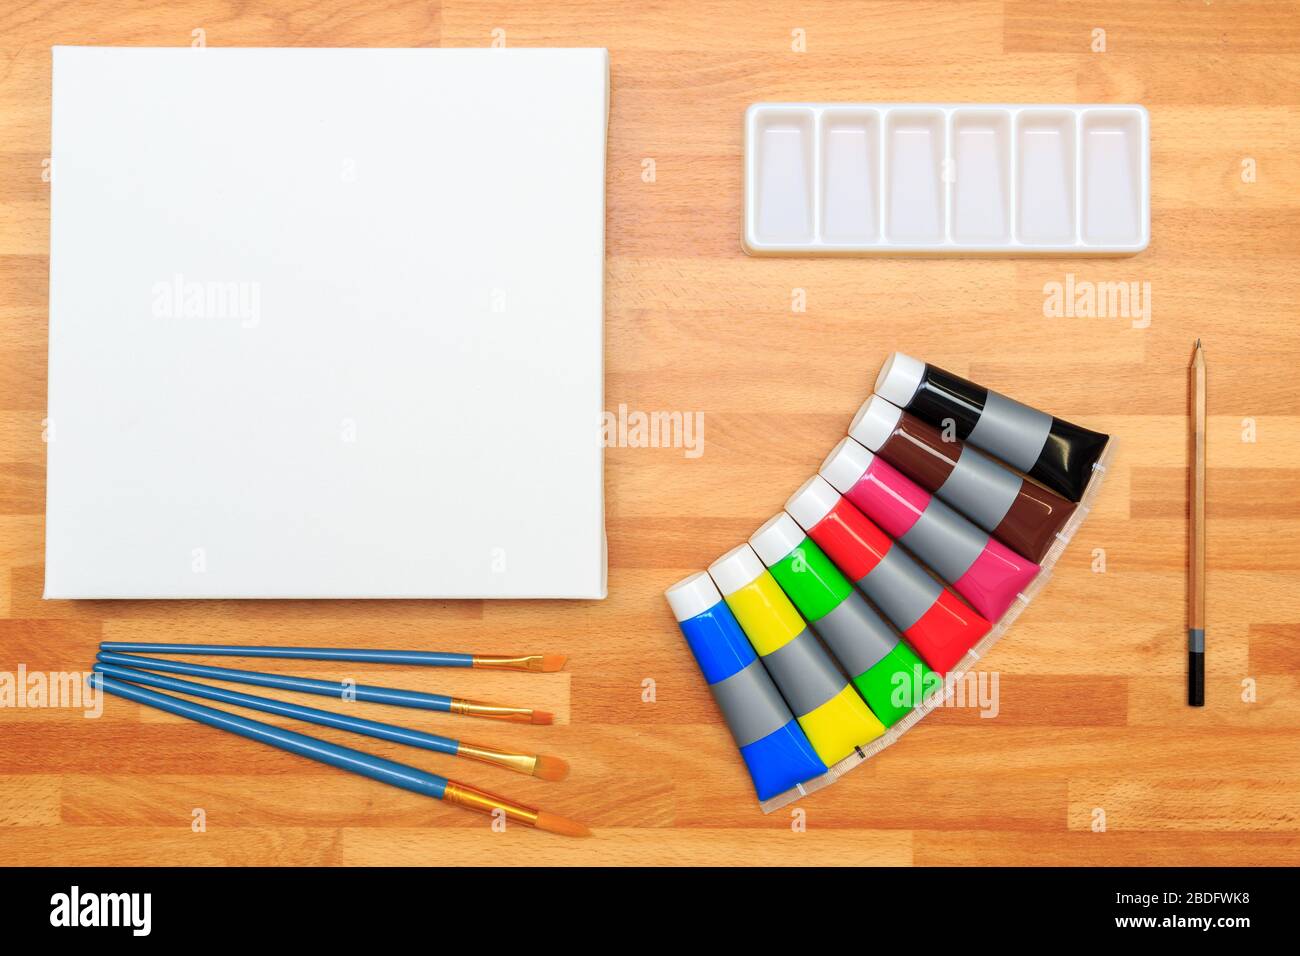 Looking down on tubes of paint, paint pallet, brushes, pencil, and white canvas on a wood background Stock Photo